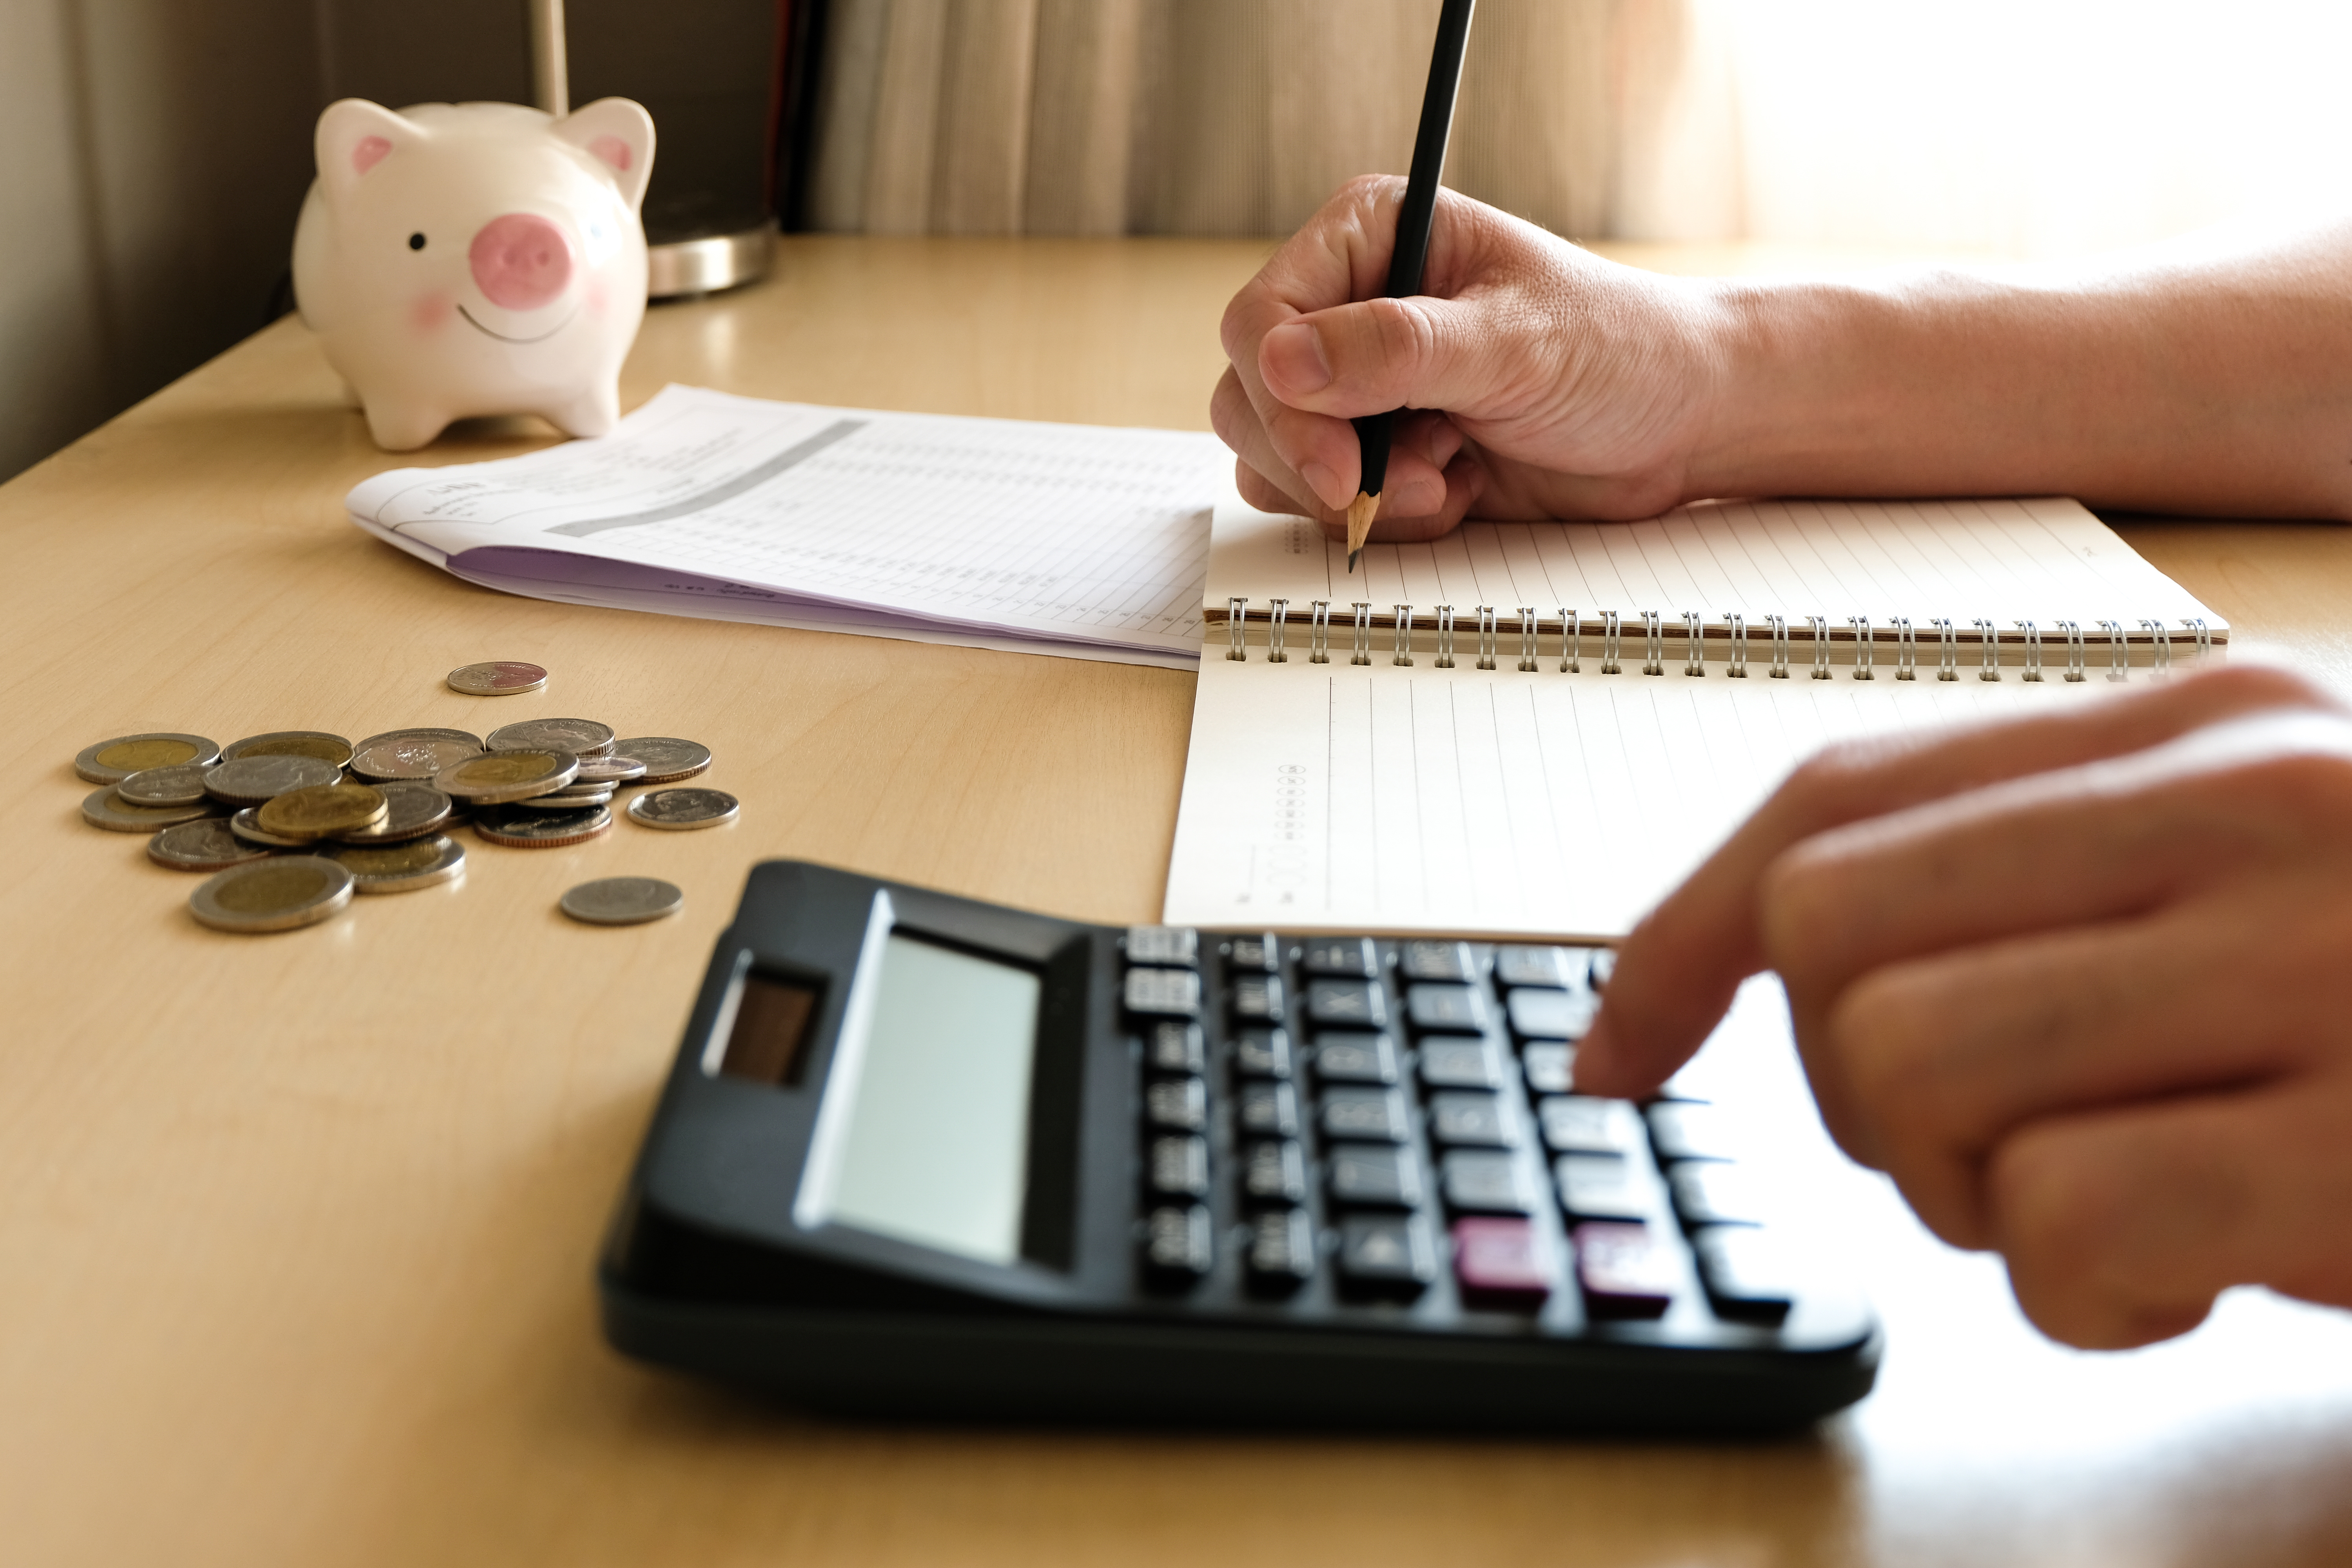 Person calculating home improvement costs with a calculator, notebook, and scattered coins on a desk.